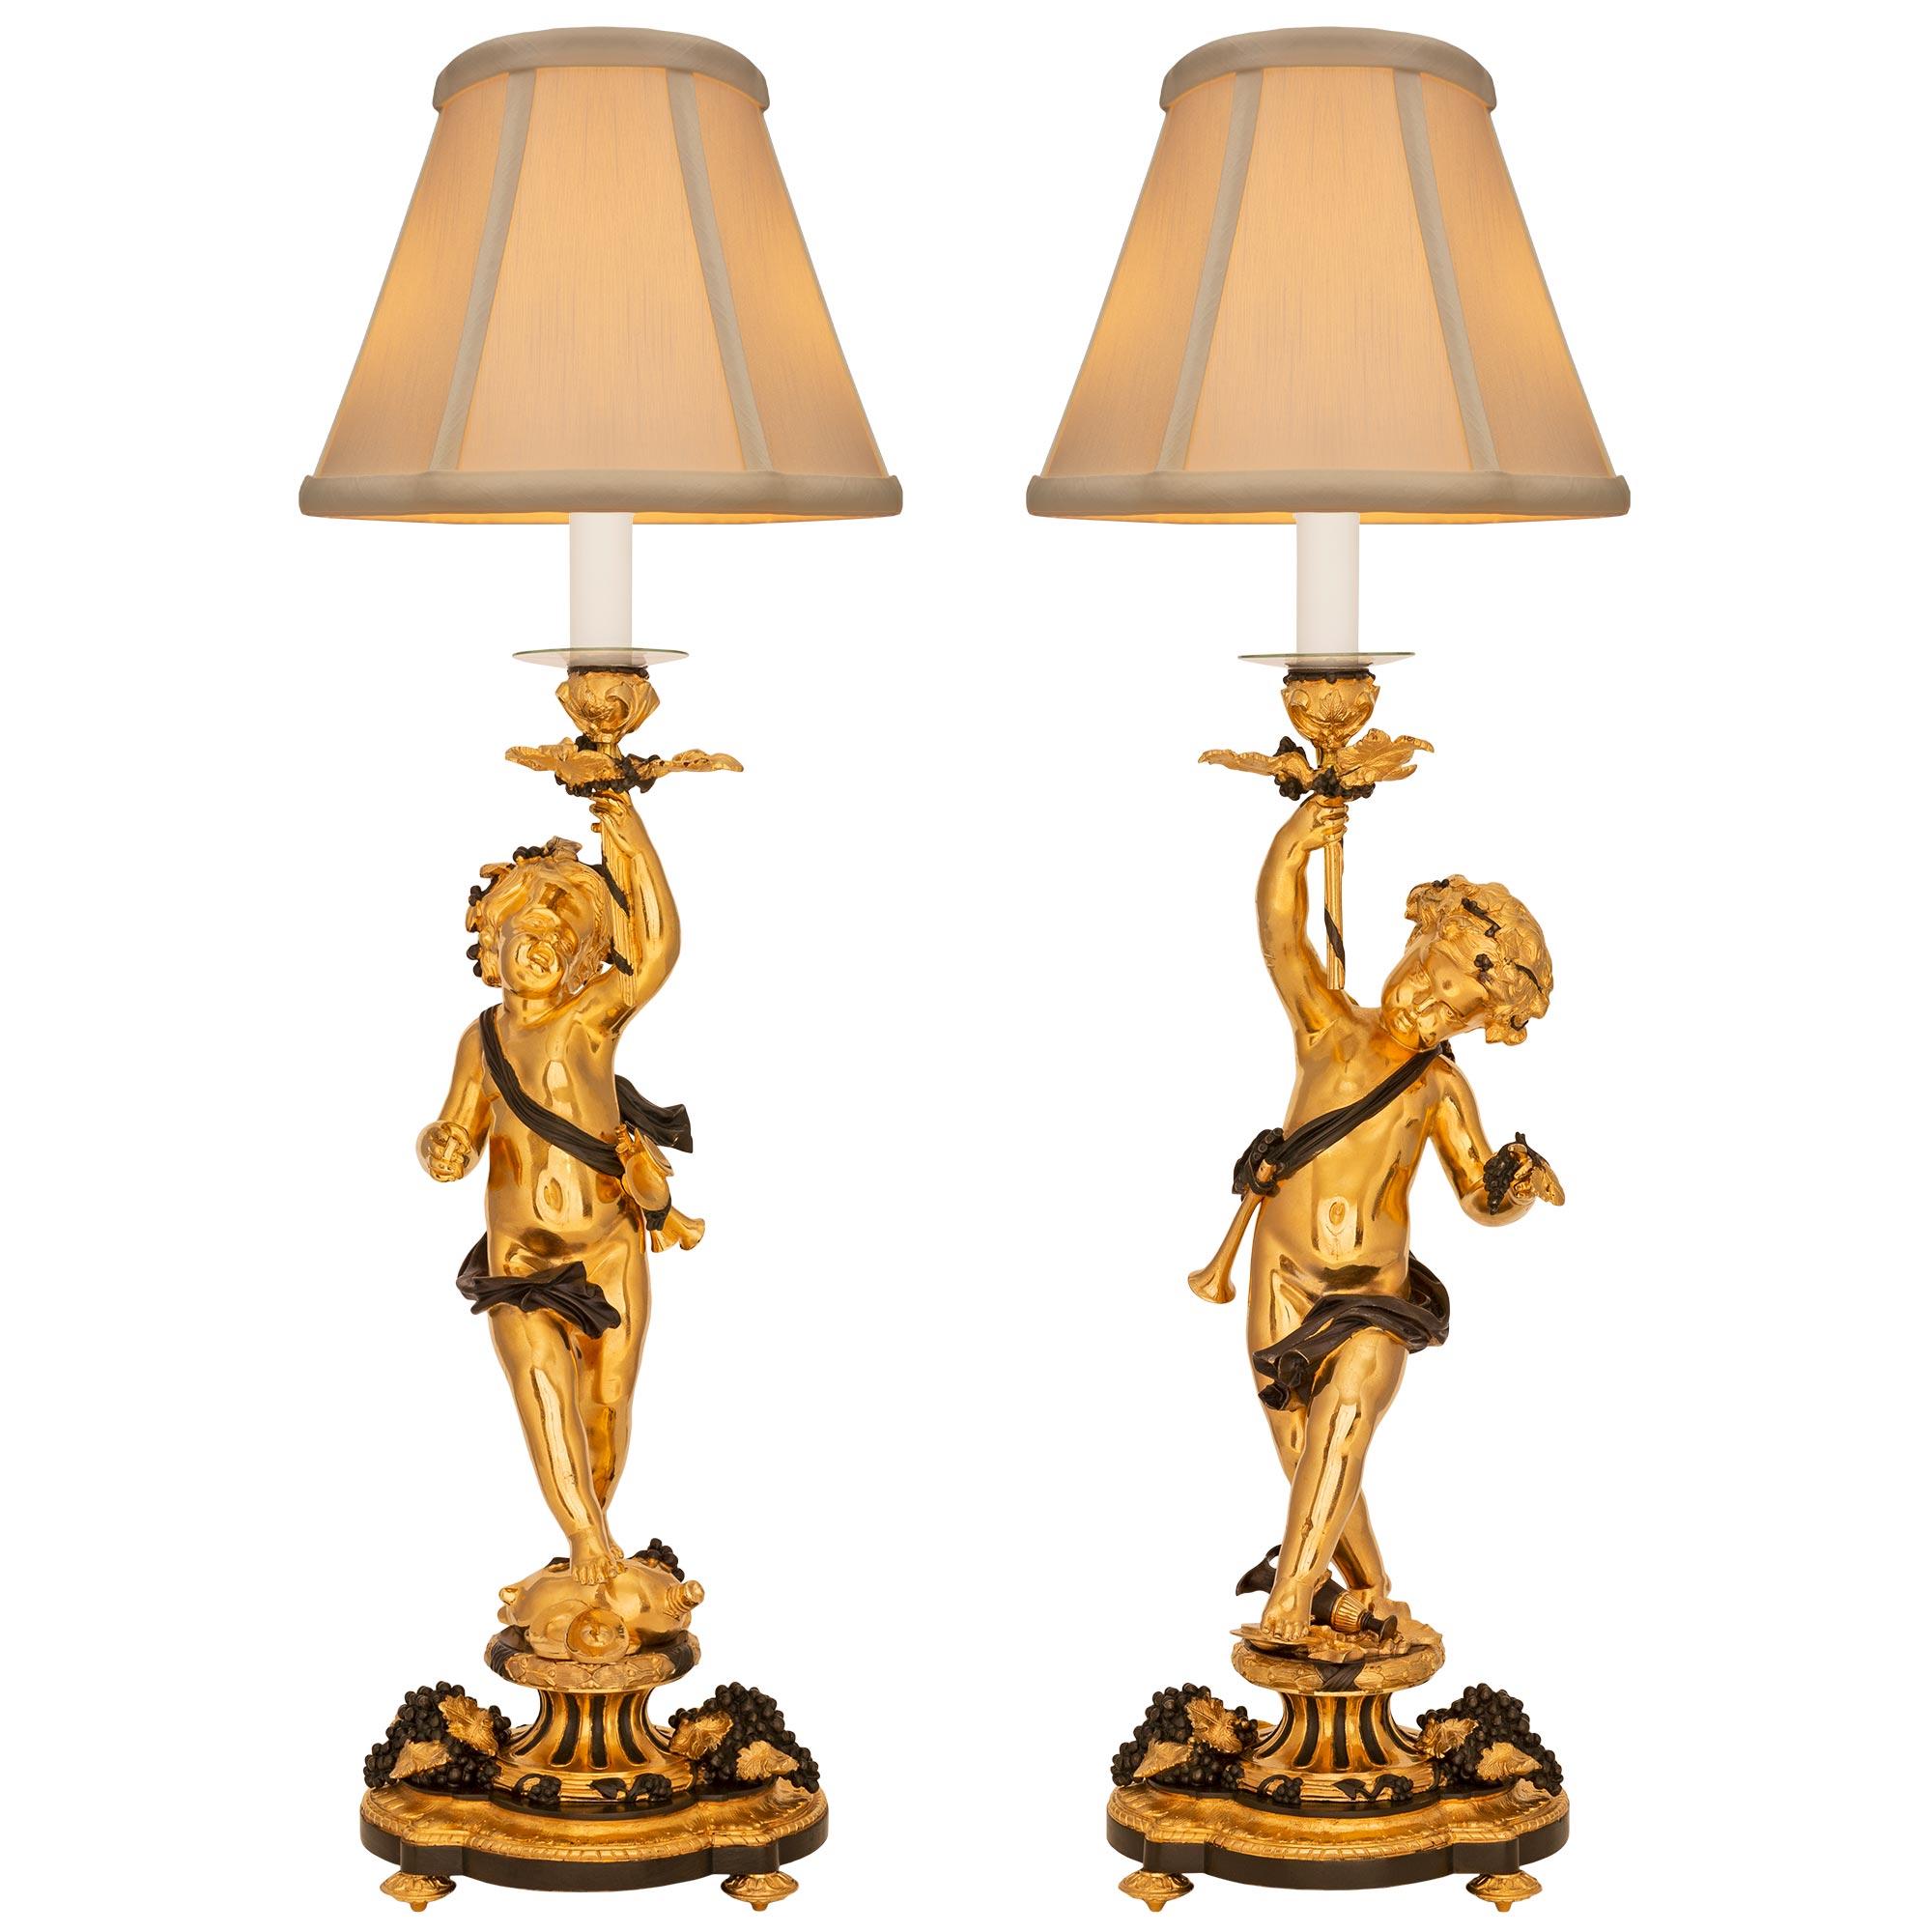 A remarkable and most decorative true pair of French 19th century Louis XVI st. Belle Époque period ormolu and patinated bronze lamps. Each lamp is raised by an elegant scalloped shaped base with fine foliate topie shaped feet, lovely grape clusters